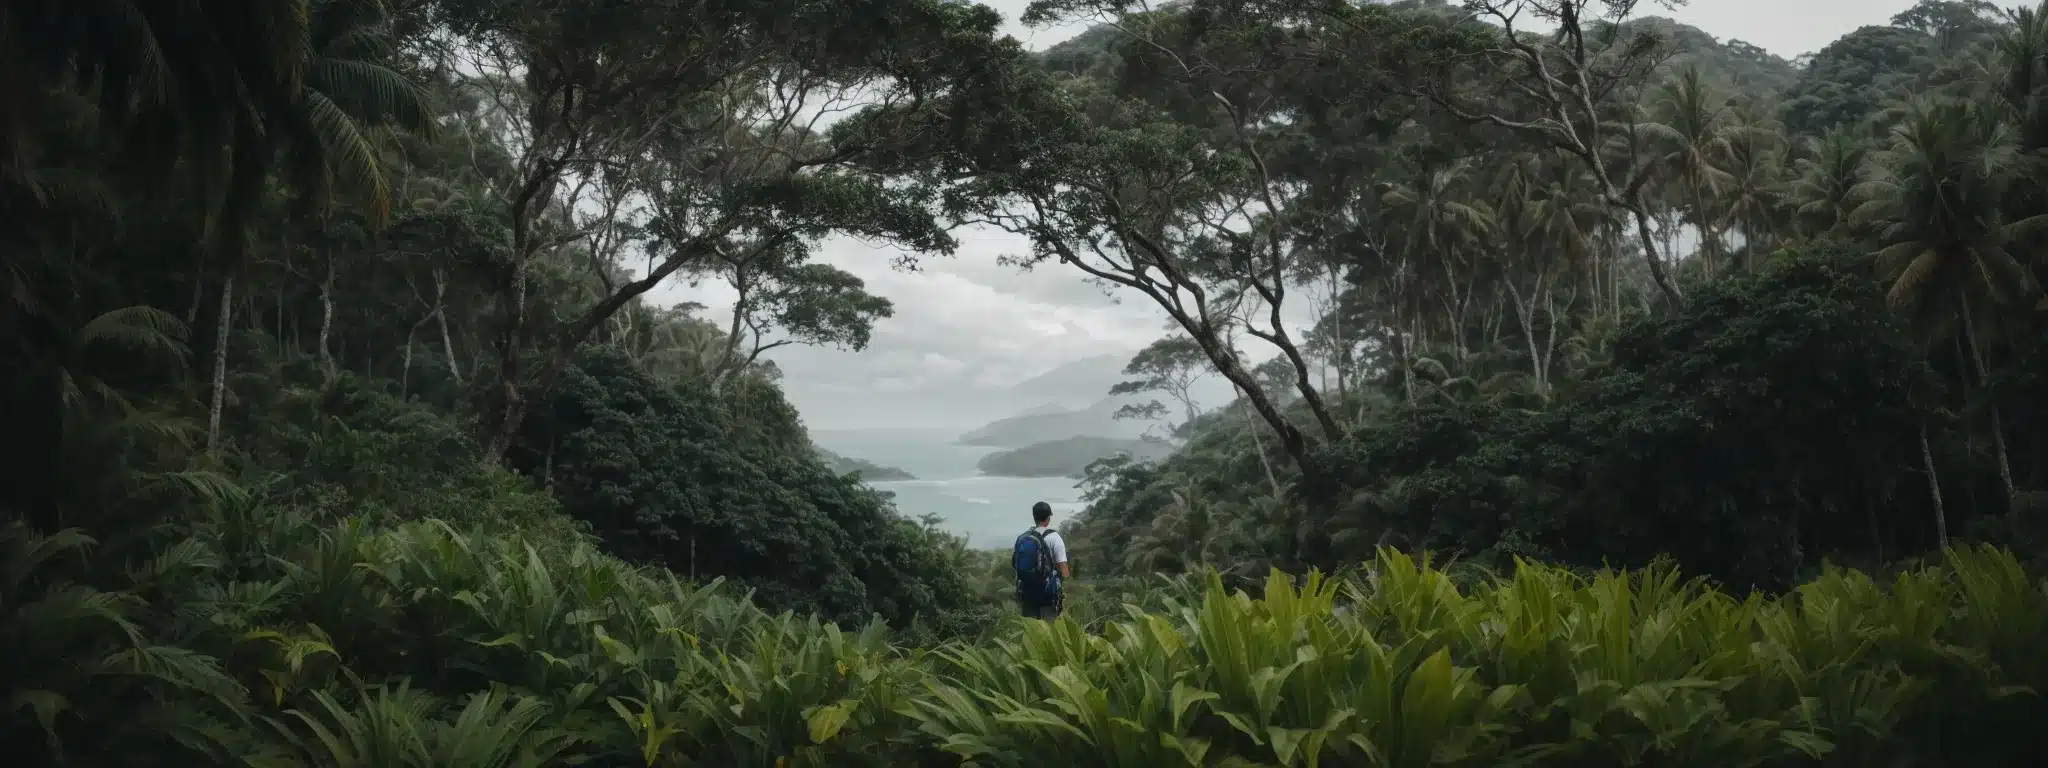 A Lone Explorer Stands At The Edge Of A Lush Tropical Jungle, Gazing At A Path Marked By Branded Flag Markers Stretching Into The Horizon.